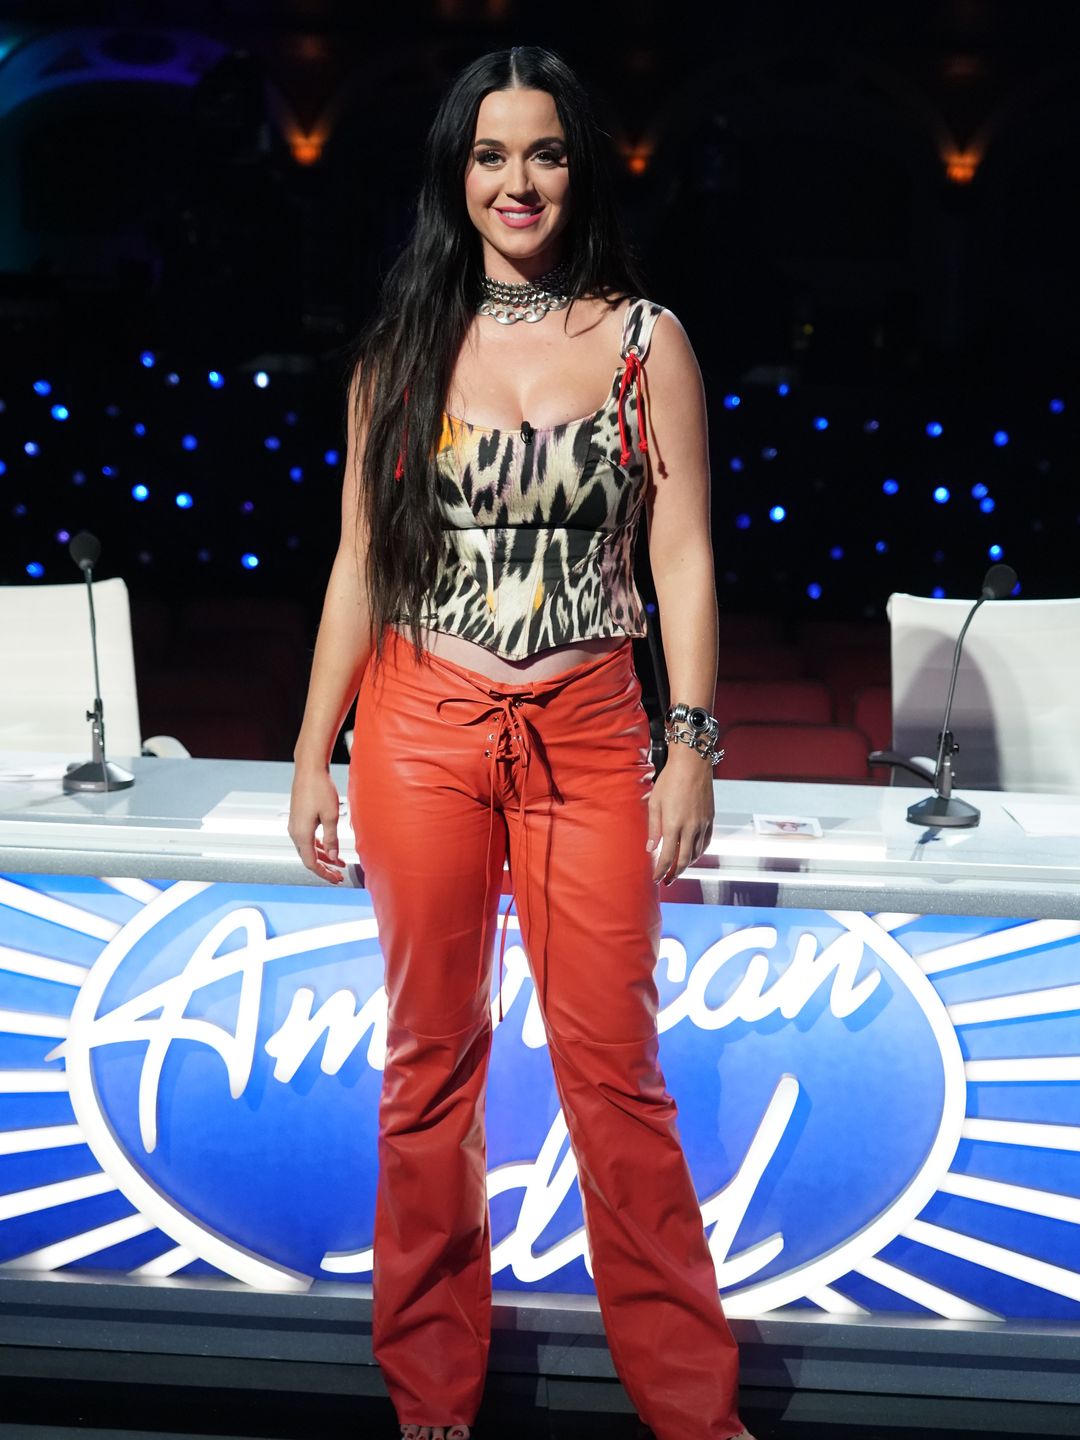 AMERICAN IDOL  506 (Hollywood Week: Genre Challenge)  The search for the next superstar continues as American Idol kicks off its iconic Hollywood Week, with some of the most prolific alums in Idols 20-year history returning to mentor the contestants, including Jordin Sparks, David Cook, Lauren Alaina, Ruben Studdard, Chayce Beckham, Lee DeWyze and Haley Reinhart. Fan favorites from auditions will then take the stage for the Genre Challenge to sing their hearts out and impress judges Luke Bryan, Katy Perry and Lionel Richie in hopes of making it through to the next round. EmmyÂ® Award-winning host and producer Ryan Seacrest hosts American Idol, MONDAY
KATY PERRY